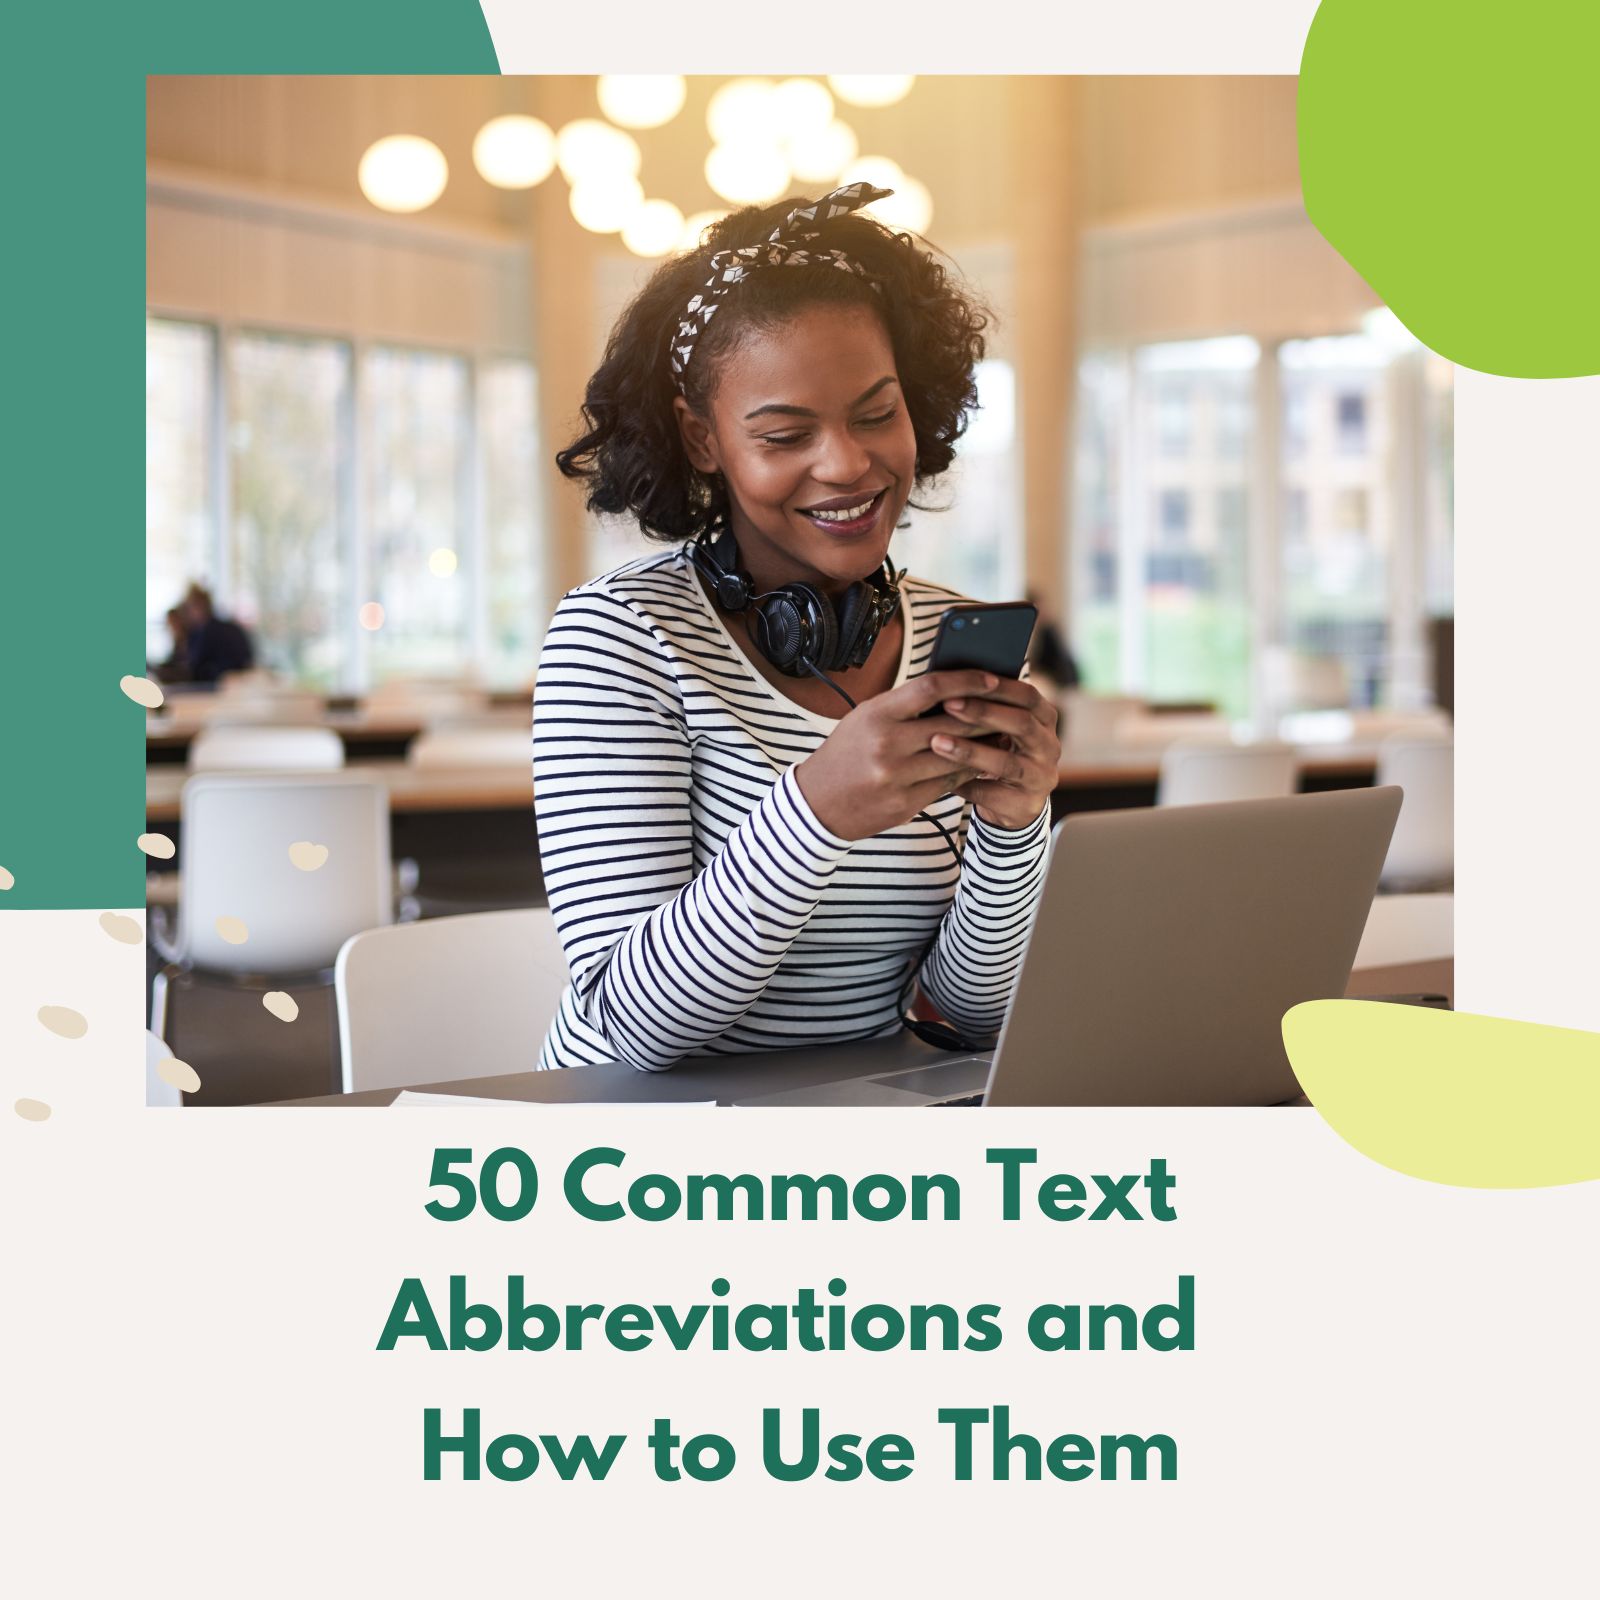 120 Common Texting Abbreviations & Acronyms To Use For Internet Slang